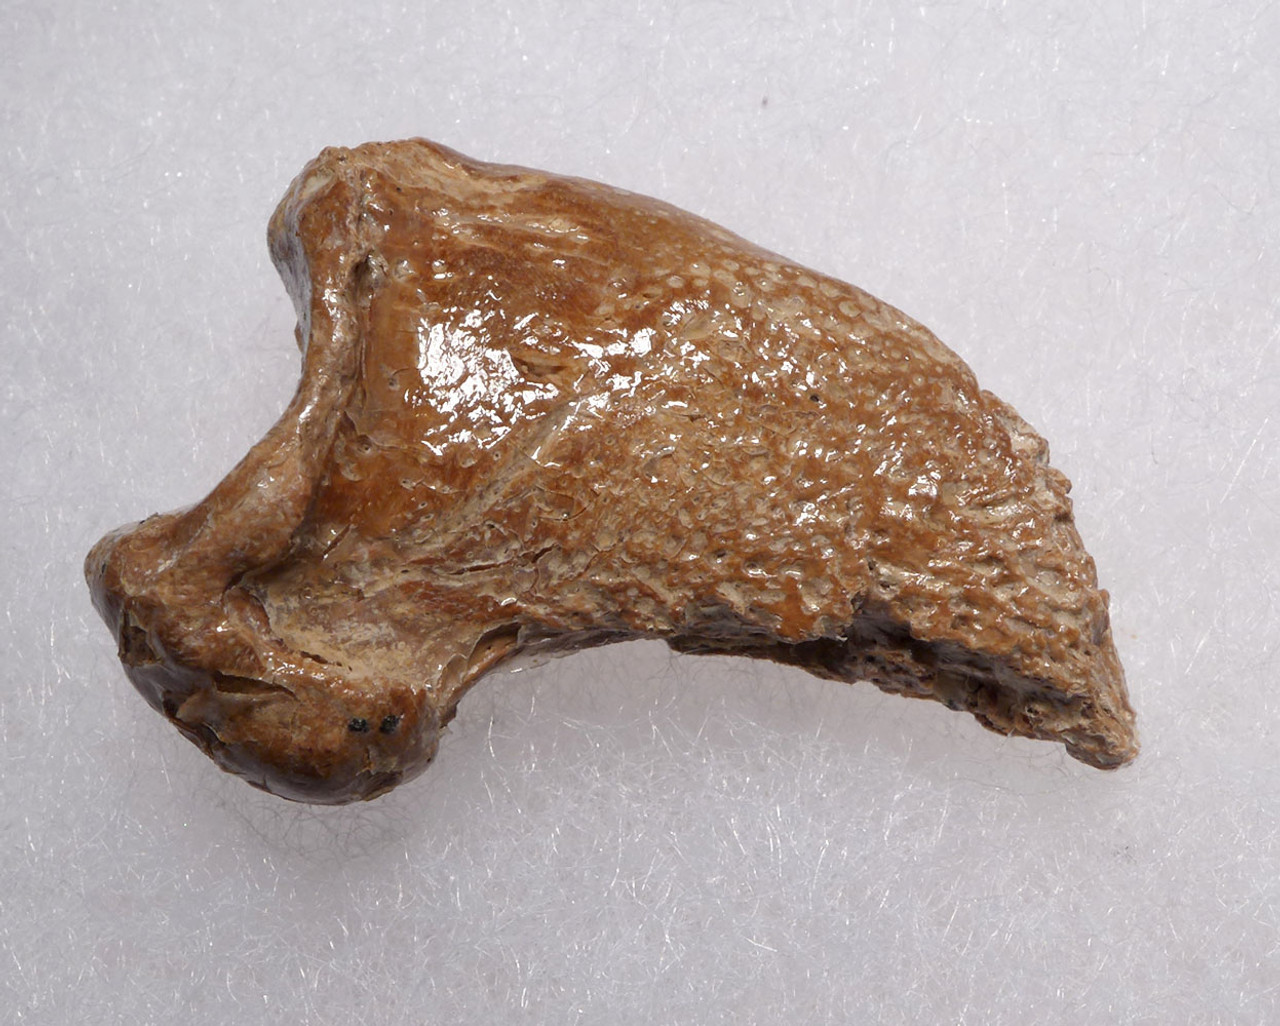 FOSSIL CAVE BEAR URSUS SPELAEUS CLAW FROM THE FAMOUS DRACHENHOHLE DRAGONS CAVE IN AUSTRIA  *LM40X19